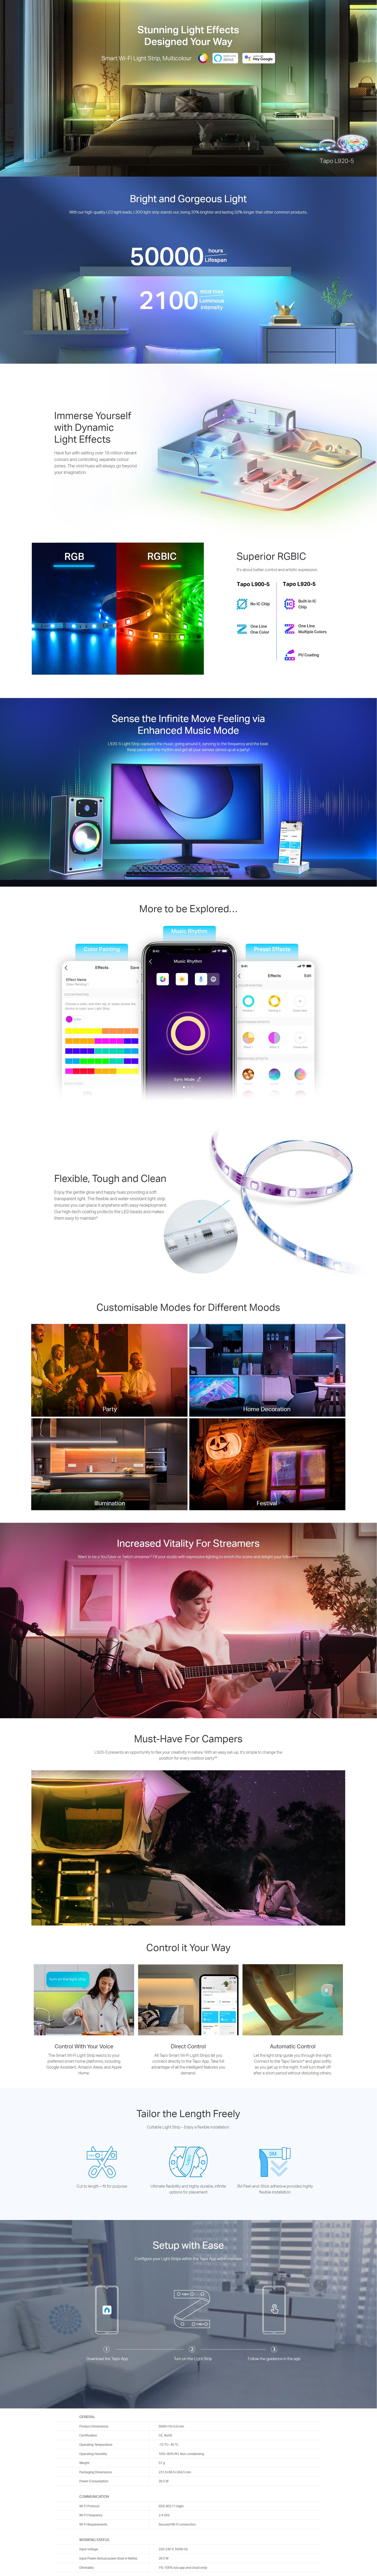 A large marketing image providing additional information about the product TP-Link Tapo L920-5 Smart Wi-Fi Light Strip - Multicolour - Additional alt info not provided